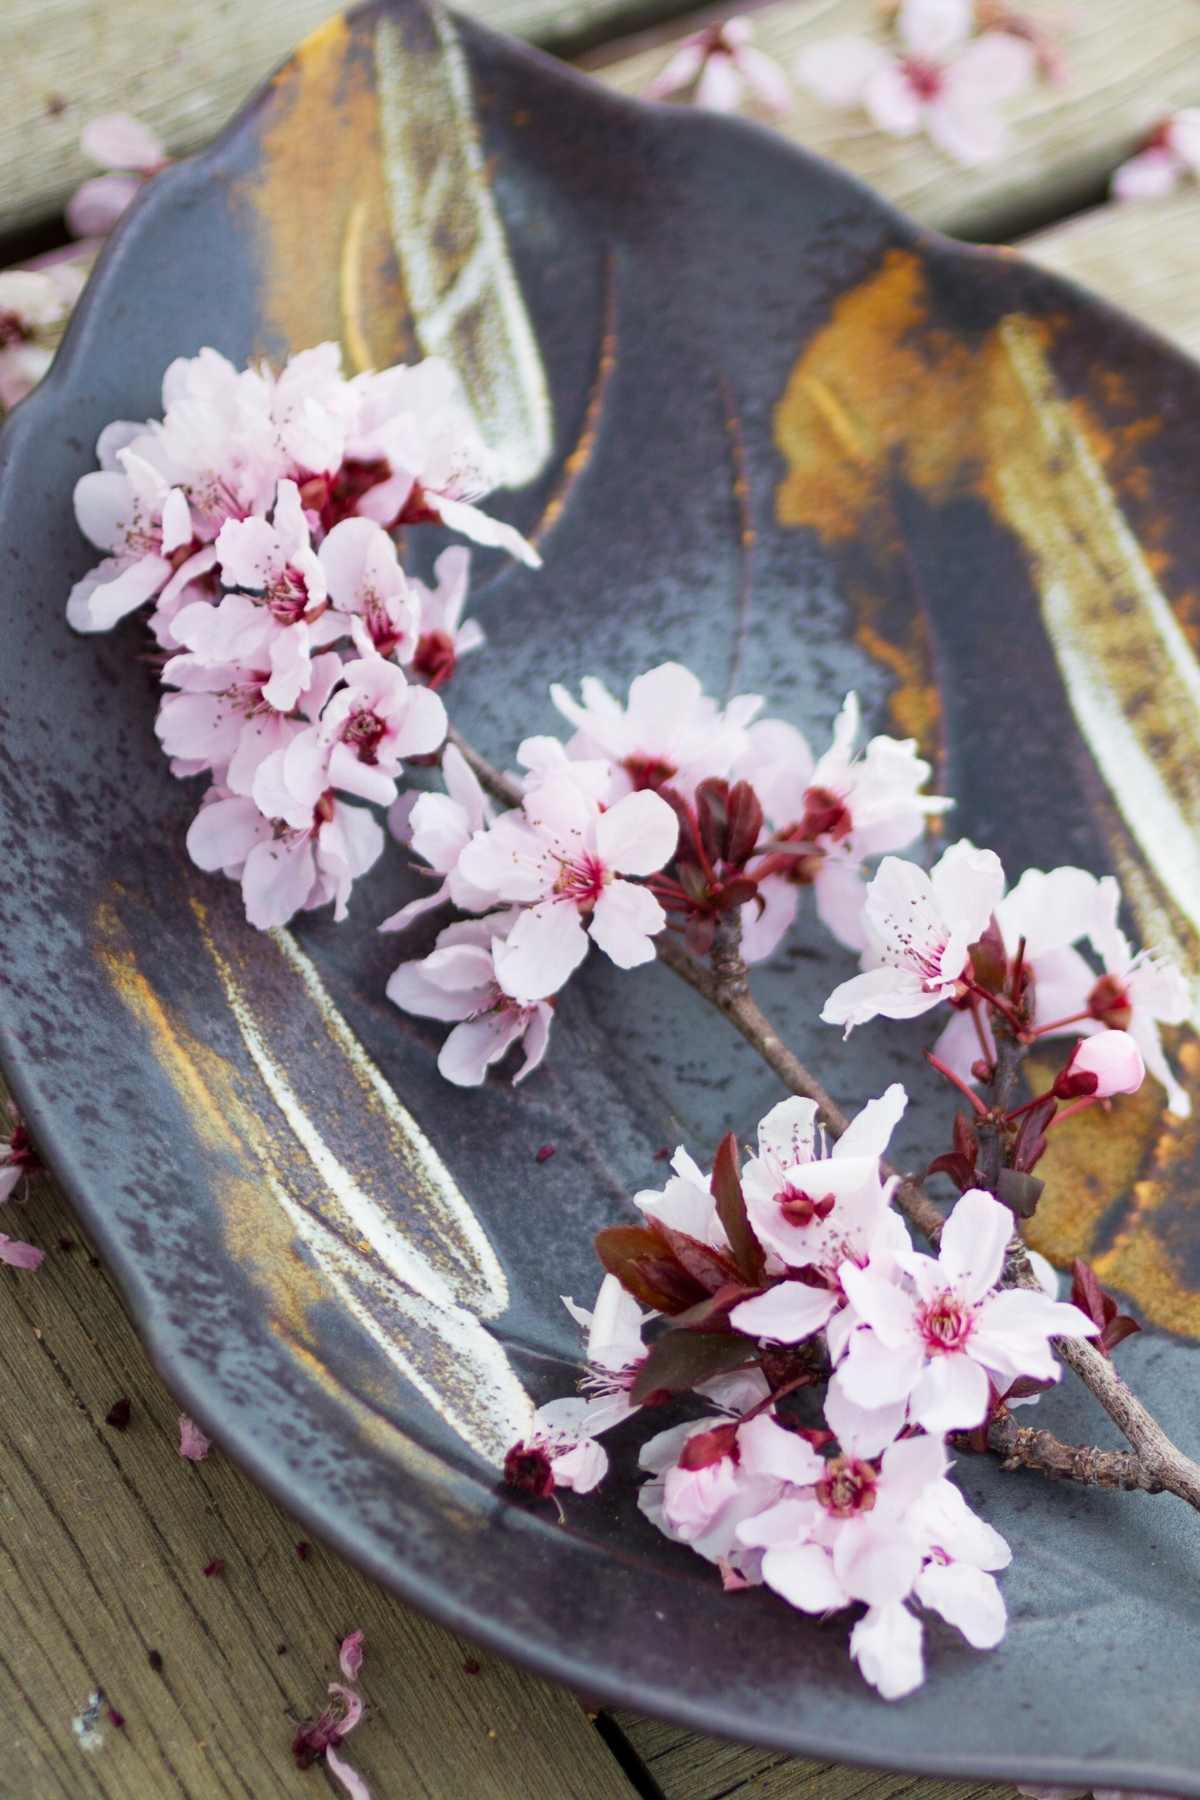 In this post, we’ve collected 11 Popular Cherry Blossom Recipes that are easy to make. From candies to pie, there are many ways to enjoy cherry blossoms!